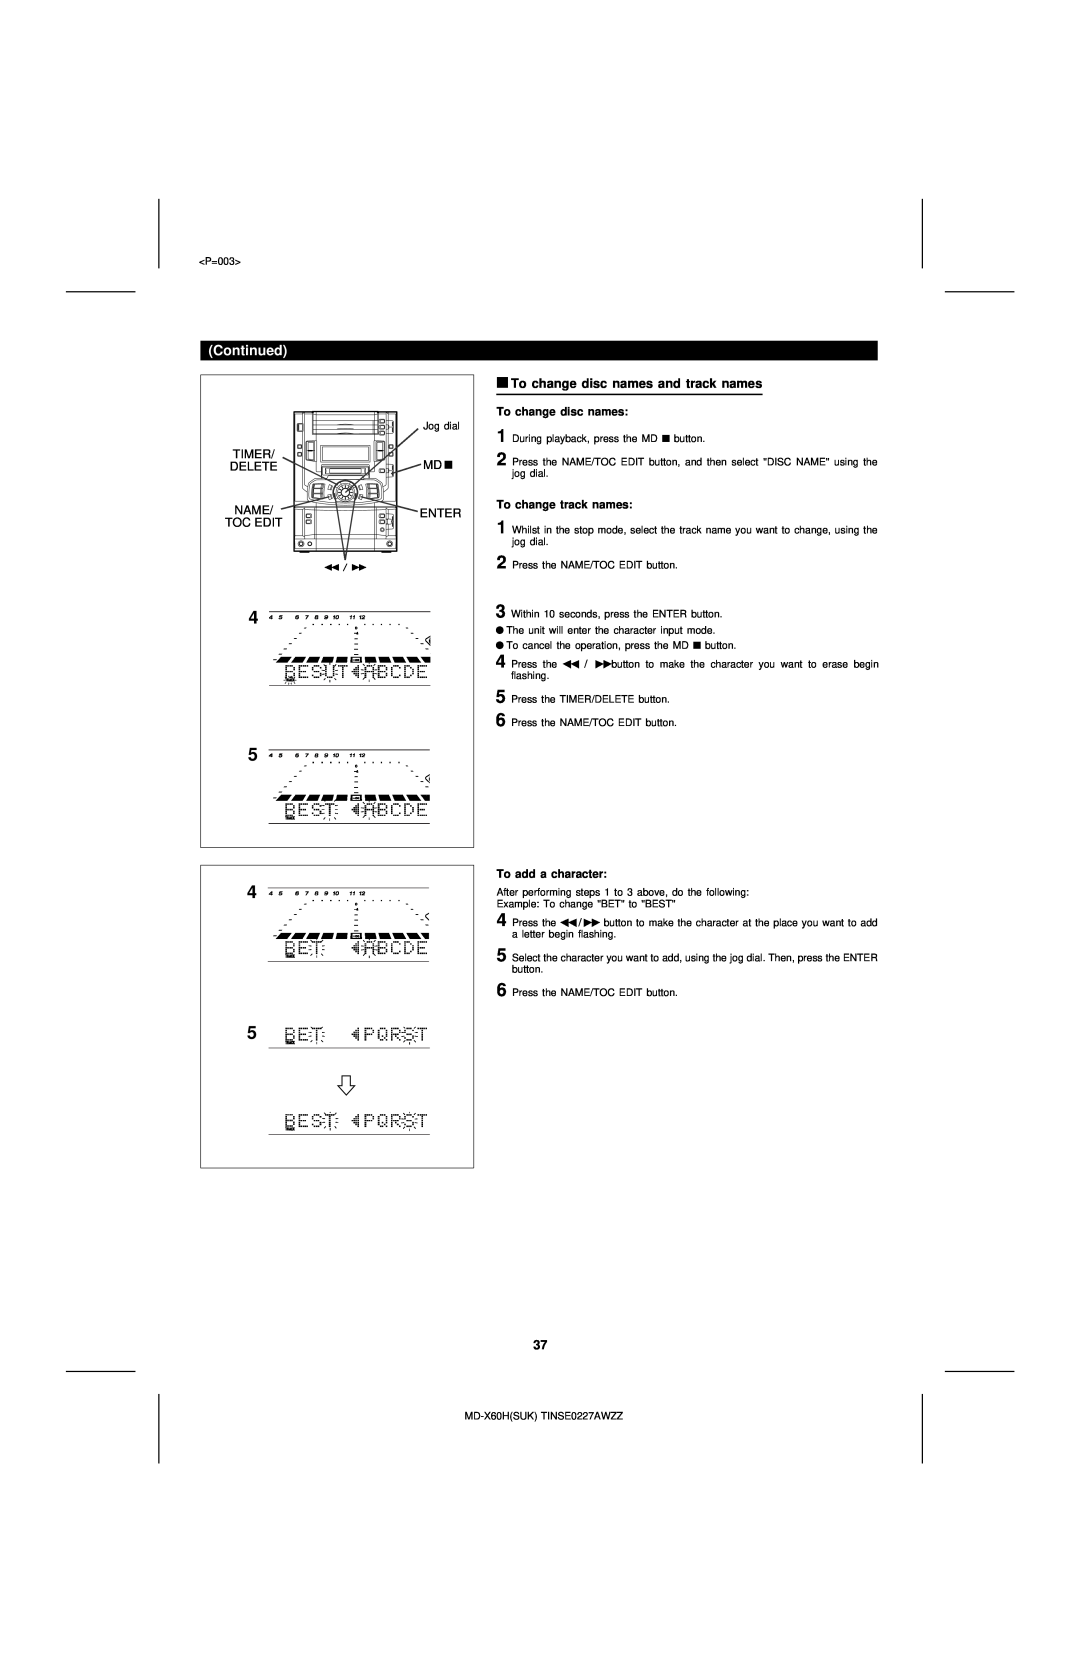 Sharp MD-X60H operation manual To change disc names and track names, Continued, To change track names, To add a character 